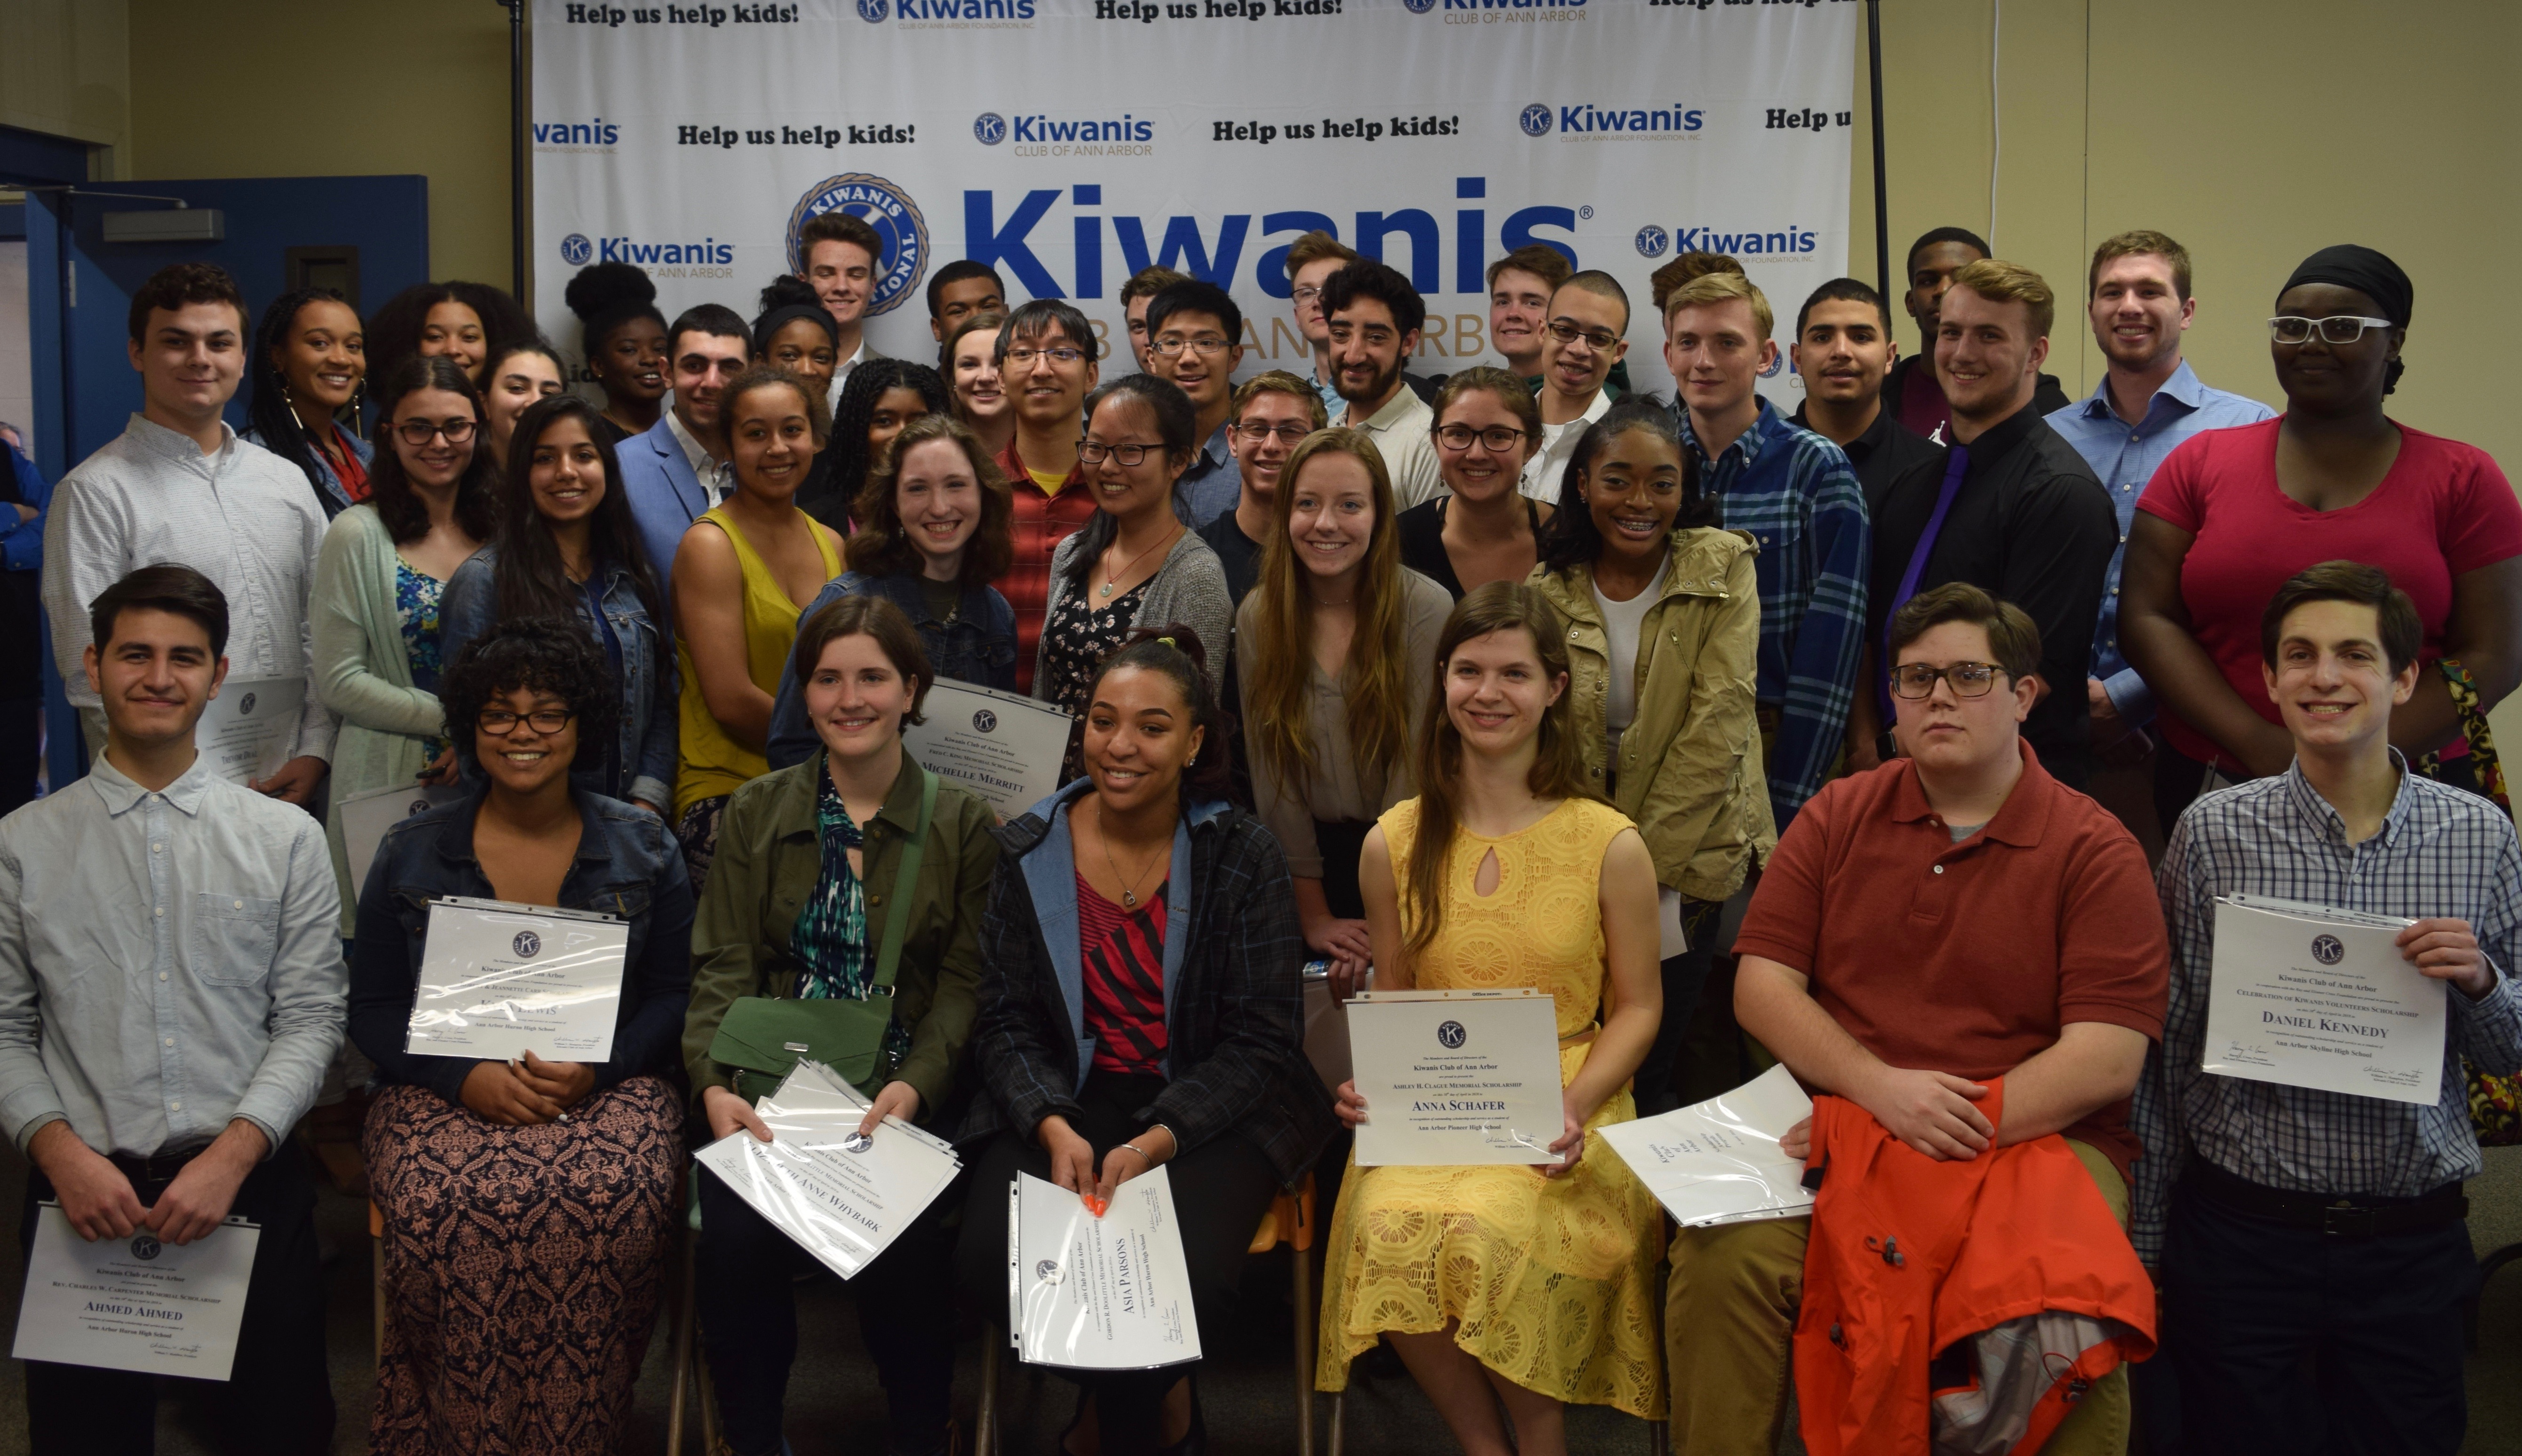 A group shot of the 46 graduating seniors that received scholarships from the Kiwanis Club of Ann Arbor.